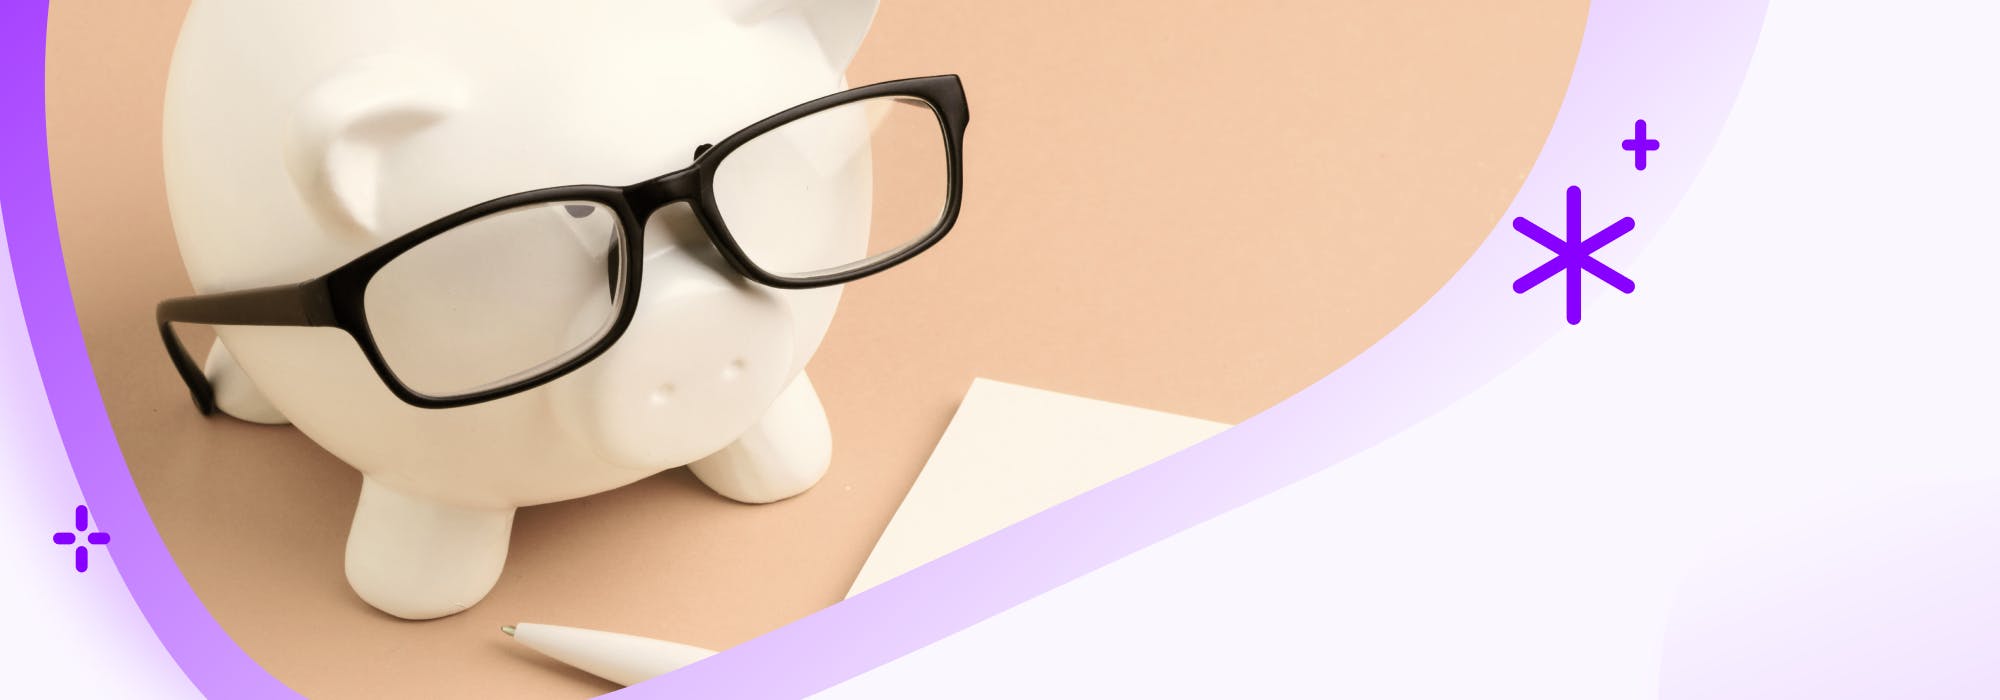 A piggy bank with glasses on taking notes on annual home maintenance costs